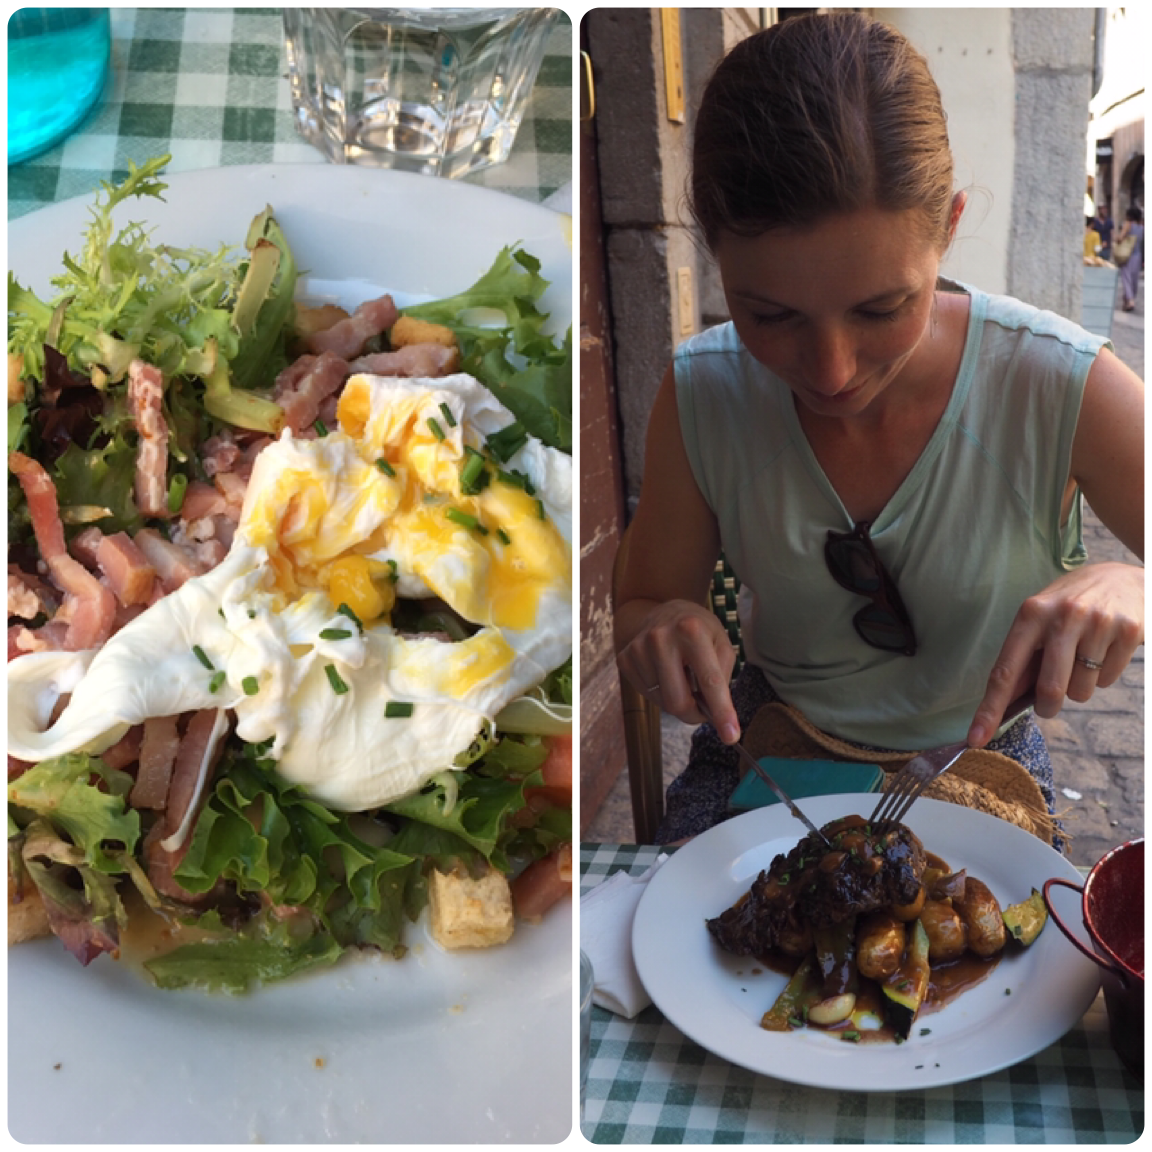 Two images together as a collage. On the left is a salad with lettuce, tomatoes, bacon and croutons. On the right is an image of a woman using a knife and fork on a steak